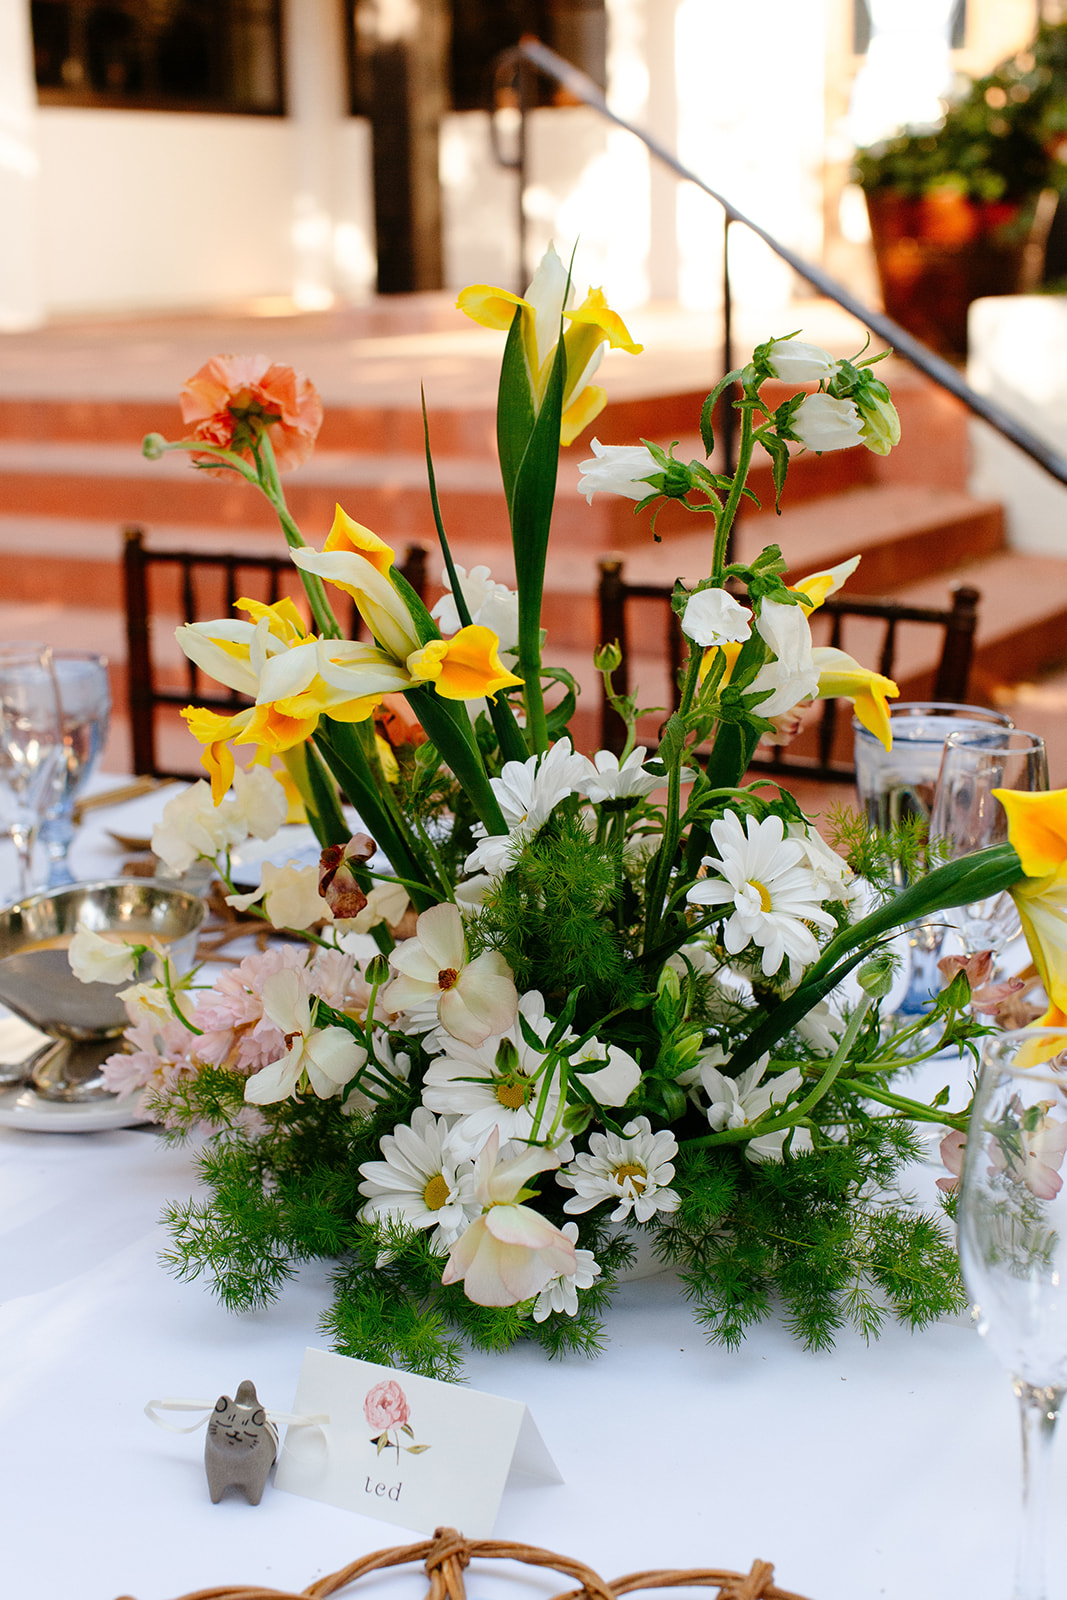 Elegant outdoor dining setup with long tables under white canopies, decorated with yellow lilies, candles, and gold cutlery for a garden party wedding